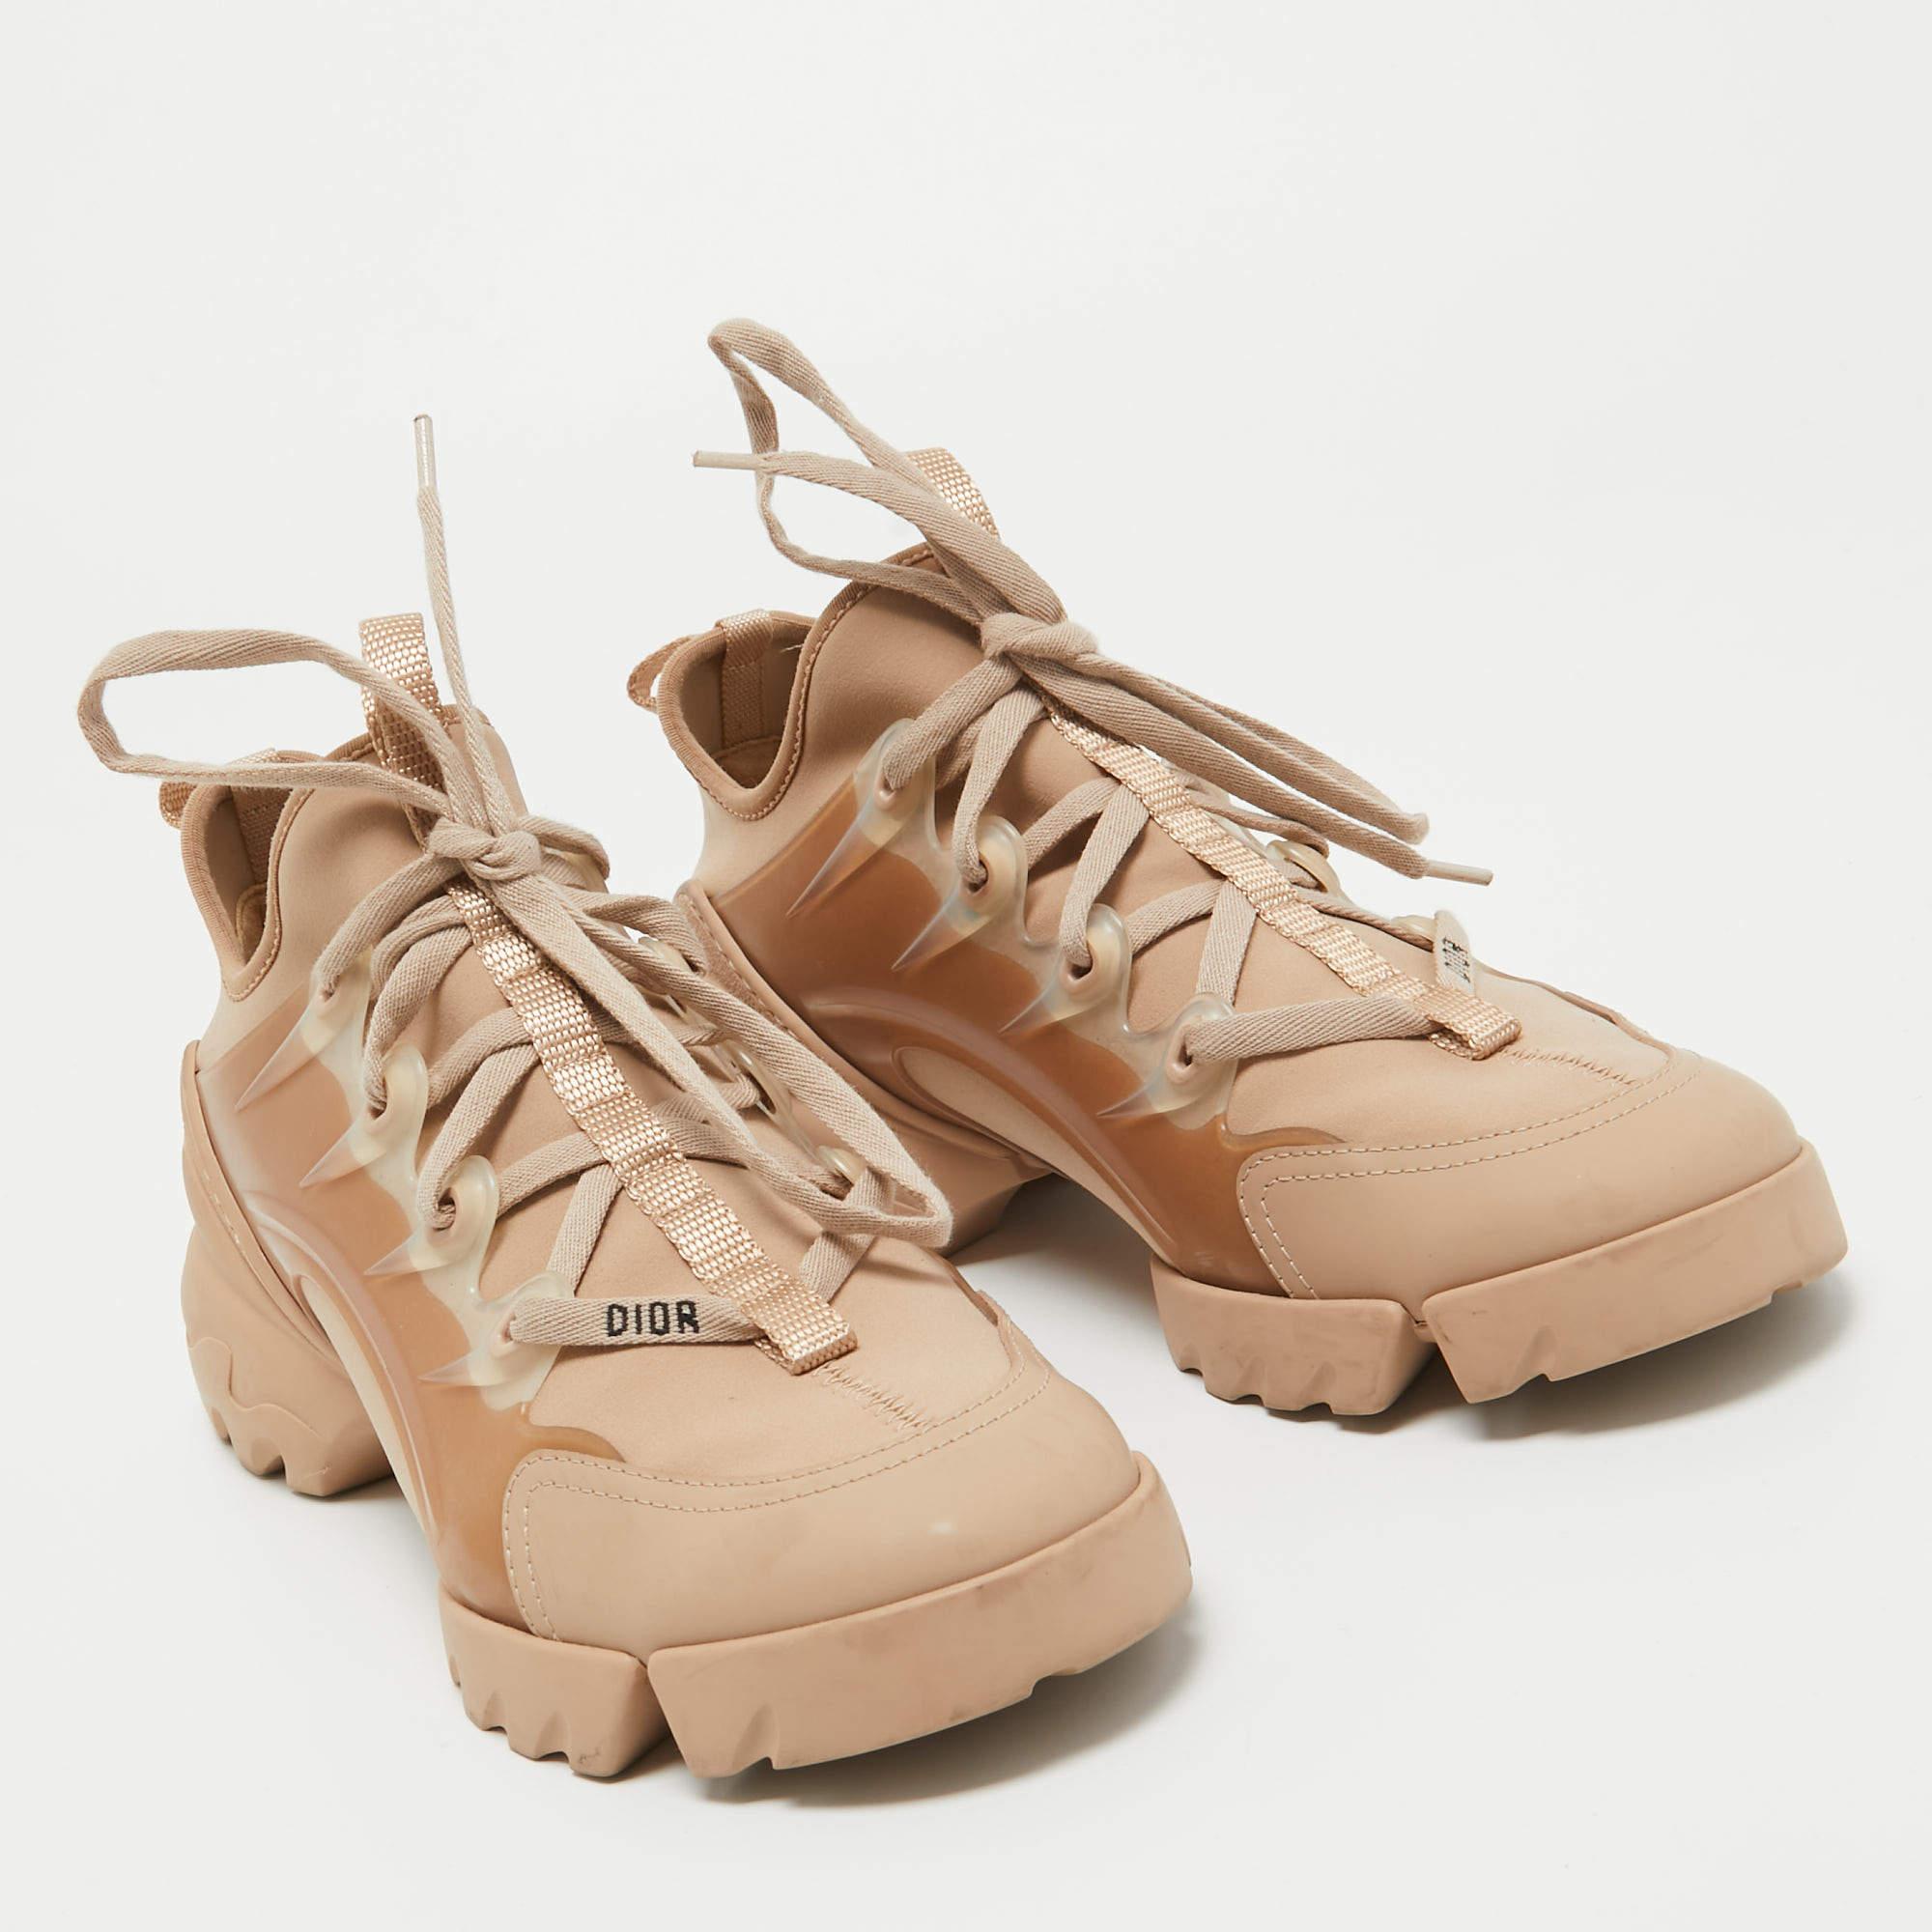 Designed into a chunky size, these Dior sneakers are not just stylish in appeal but also comfortable to wear. Crafted from quality materials, they are styled with a paneled design. Finished off with laces on the vamps, these kicks still top any